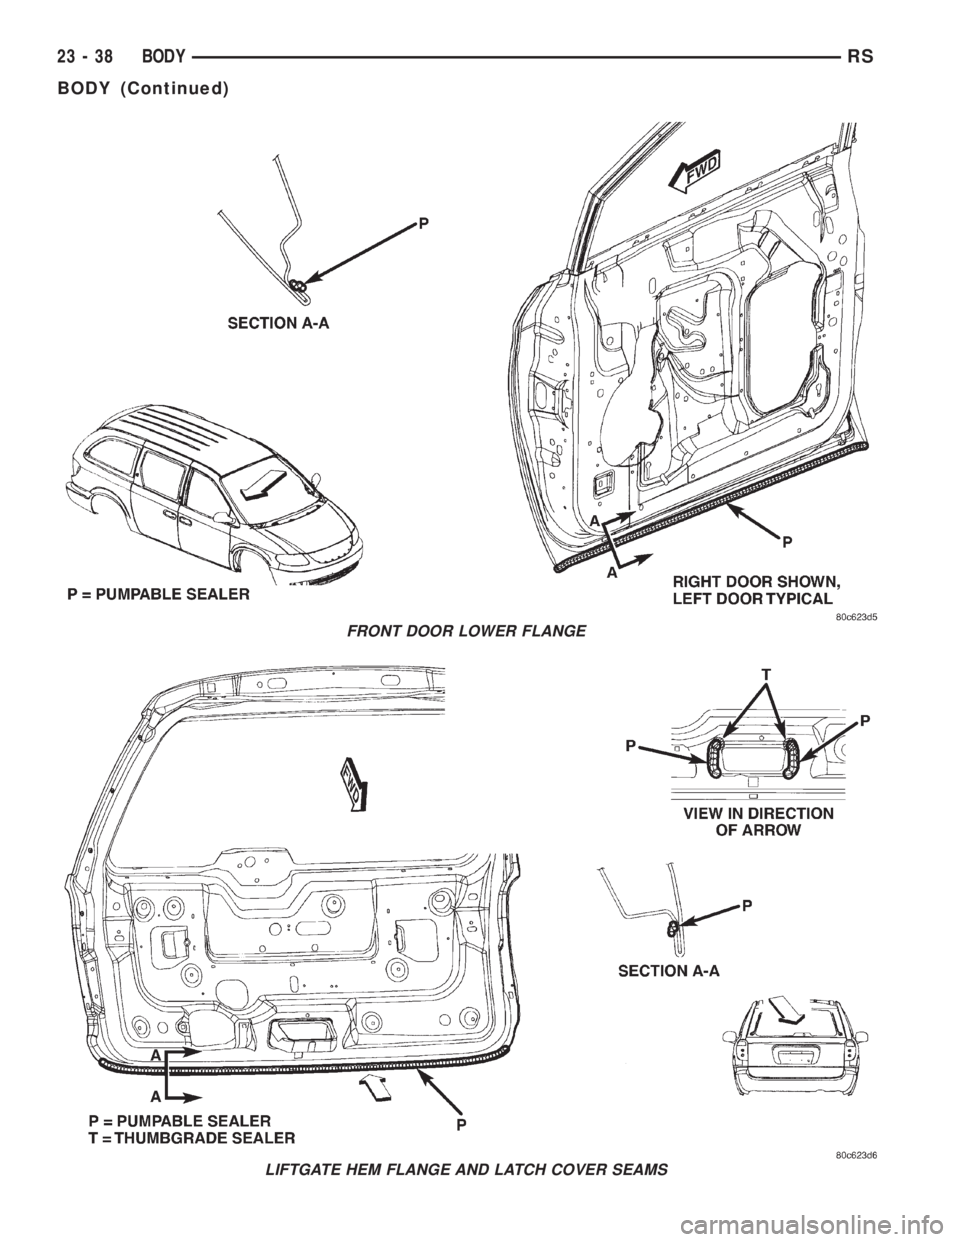 CHRYSLER VOYAGER 2001  Service Manual FRONT DOOR LOWER FLANGE
LIFTGATE HEM FLANGE AND LATCH COVER SEAMS
23 - 38 BODYRS
BODY (Continued) 